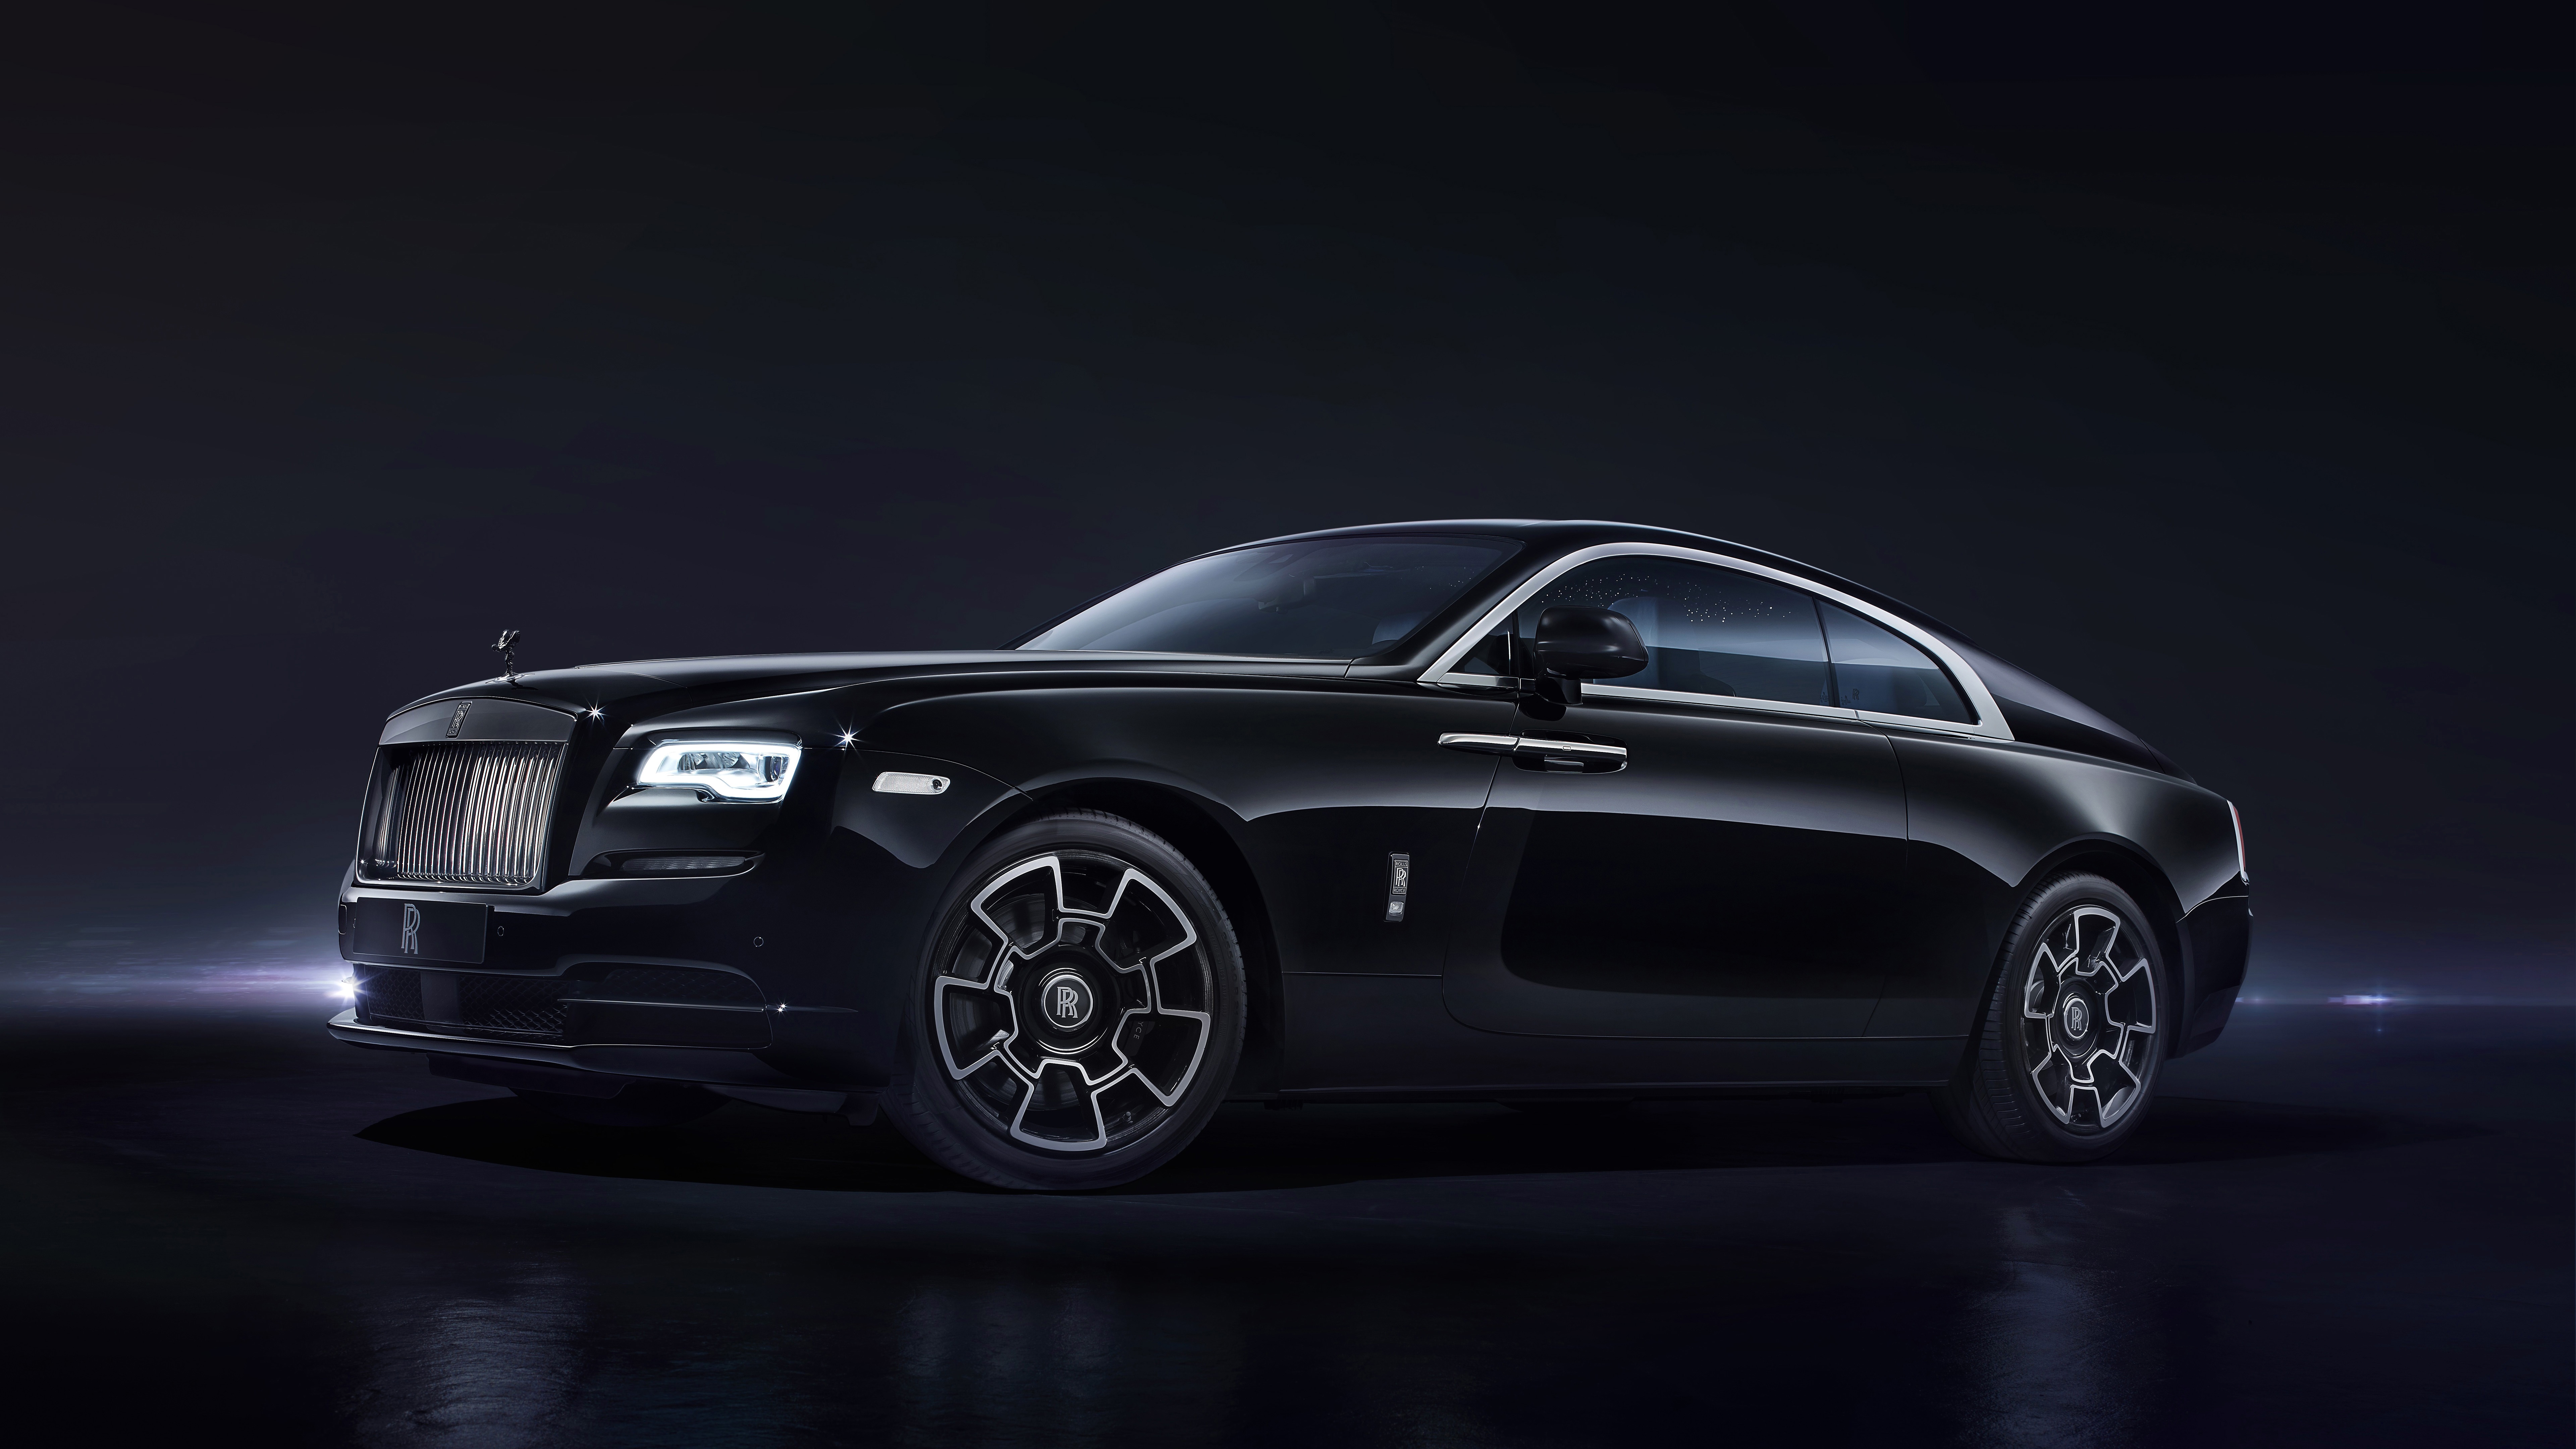  Rolls Royce HQ Background Images